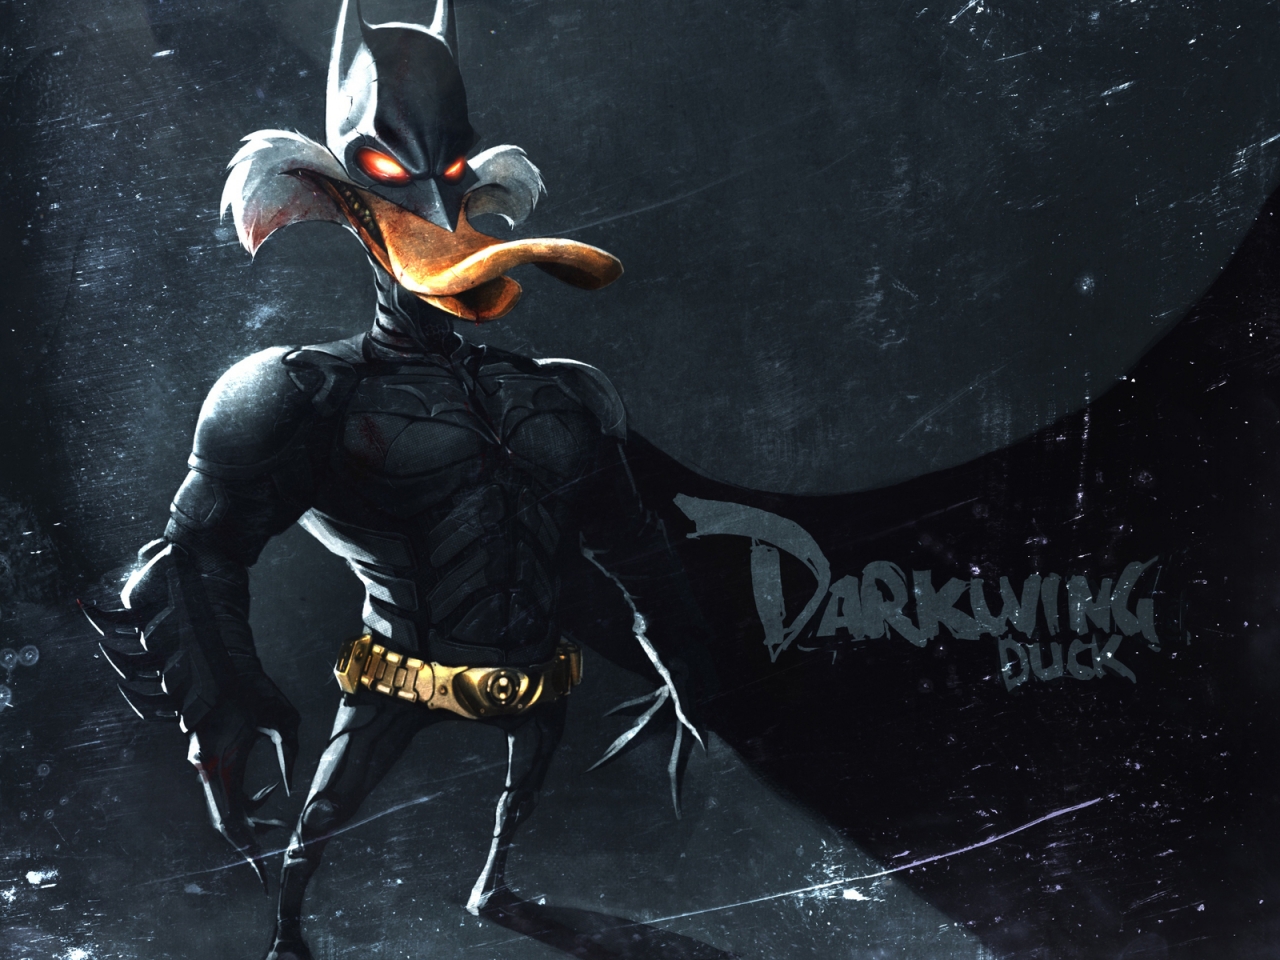 Darkwing Duck Mask for 1280 x 960 resolution